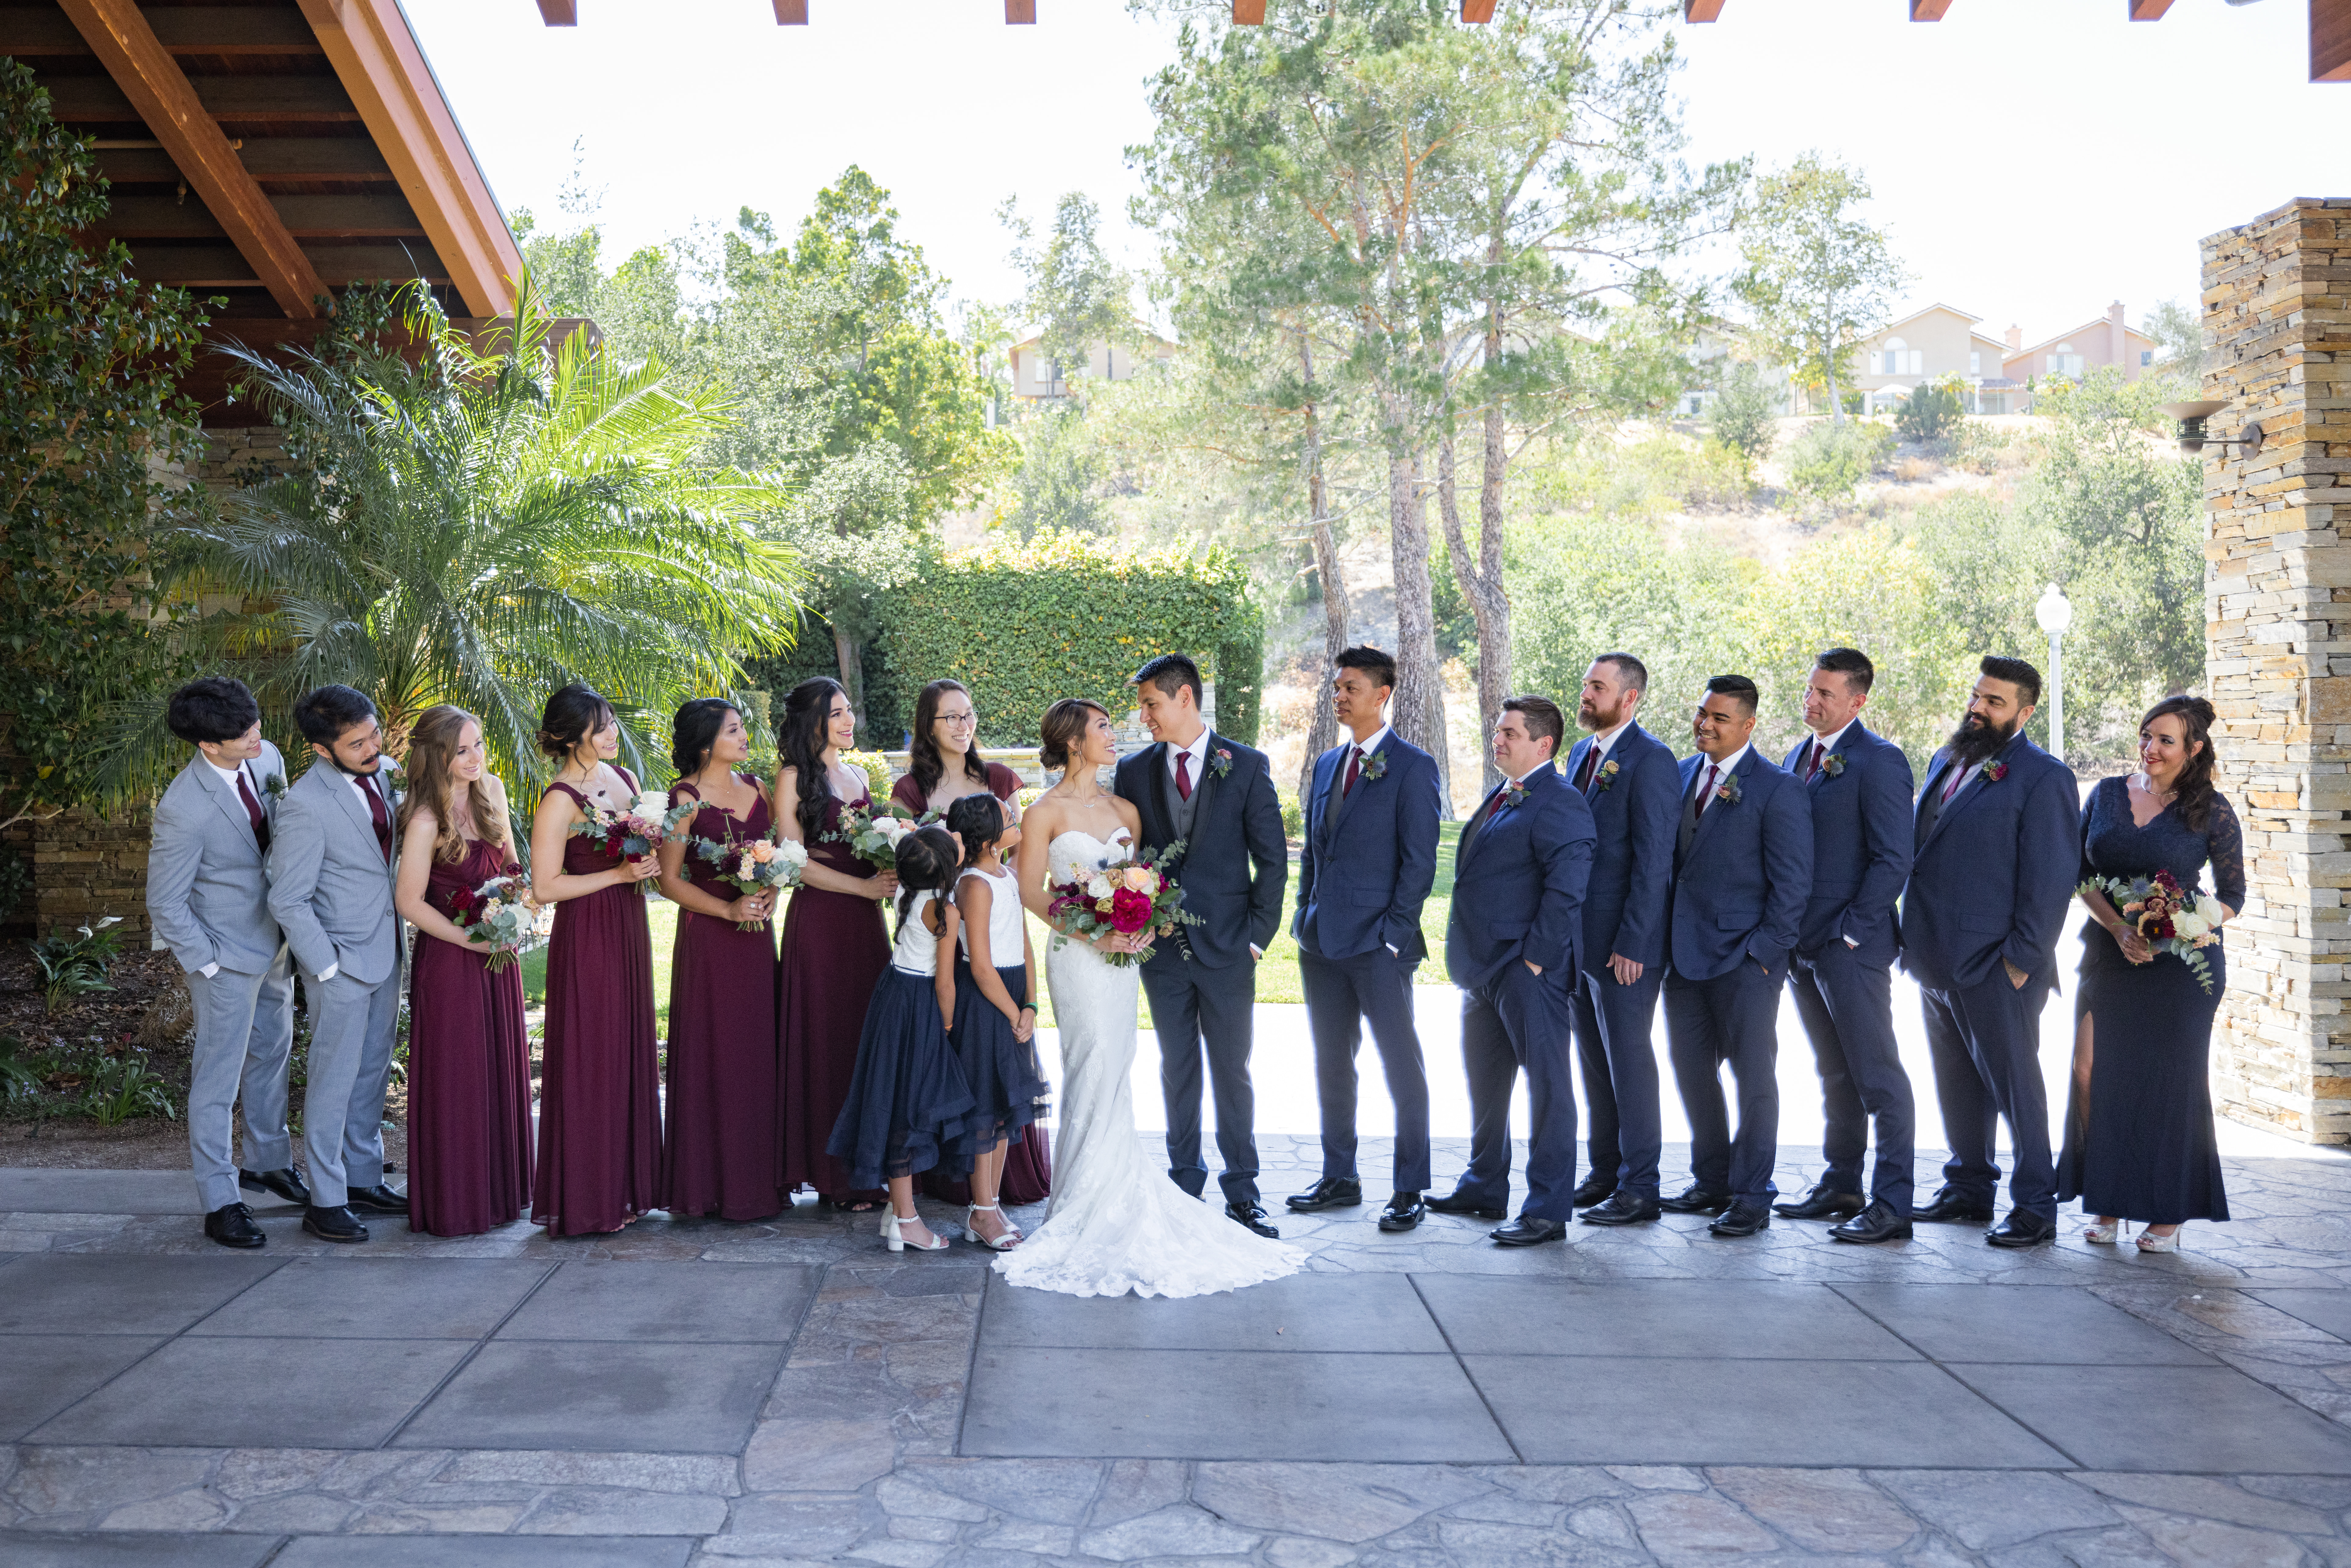 bride in strapless wedding dress and jewel toned bridal bouquet and groom in navy tuxedo suit with black lapels, grey vest and maroon tie stand with co-ed wedding party